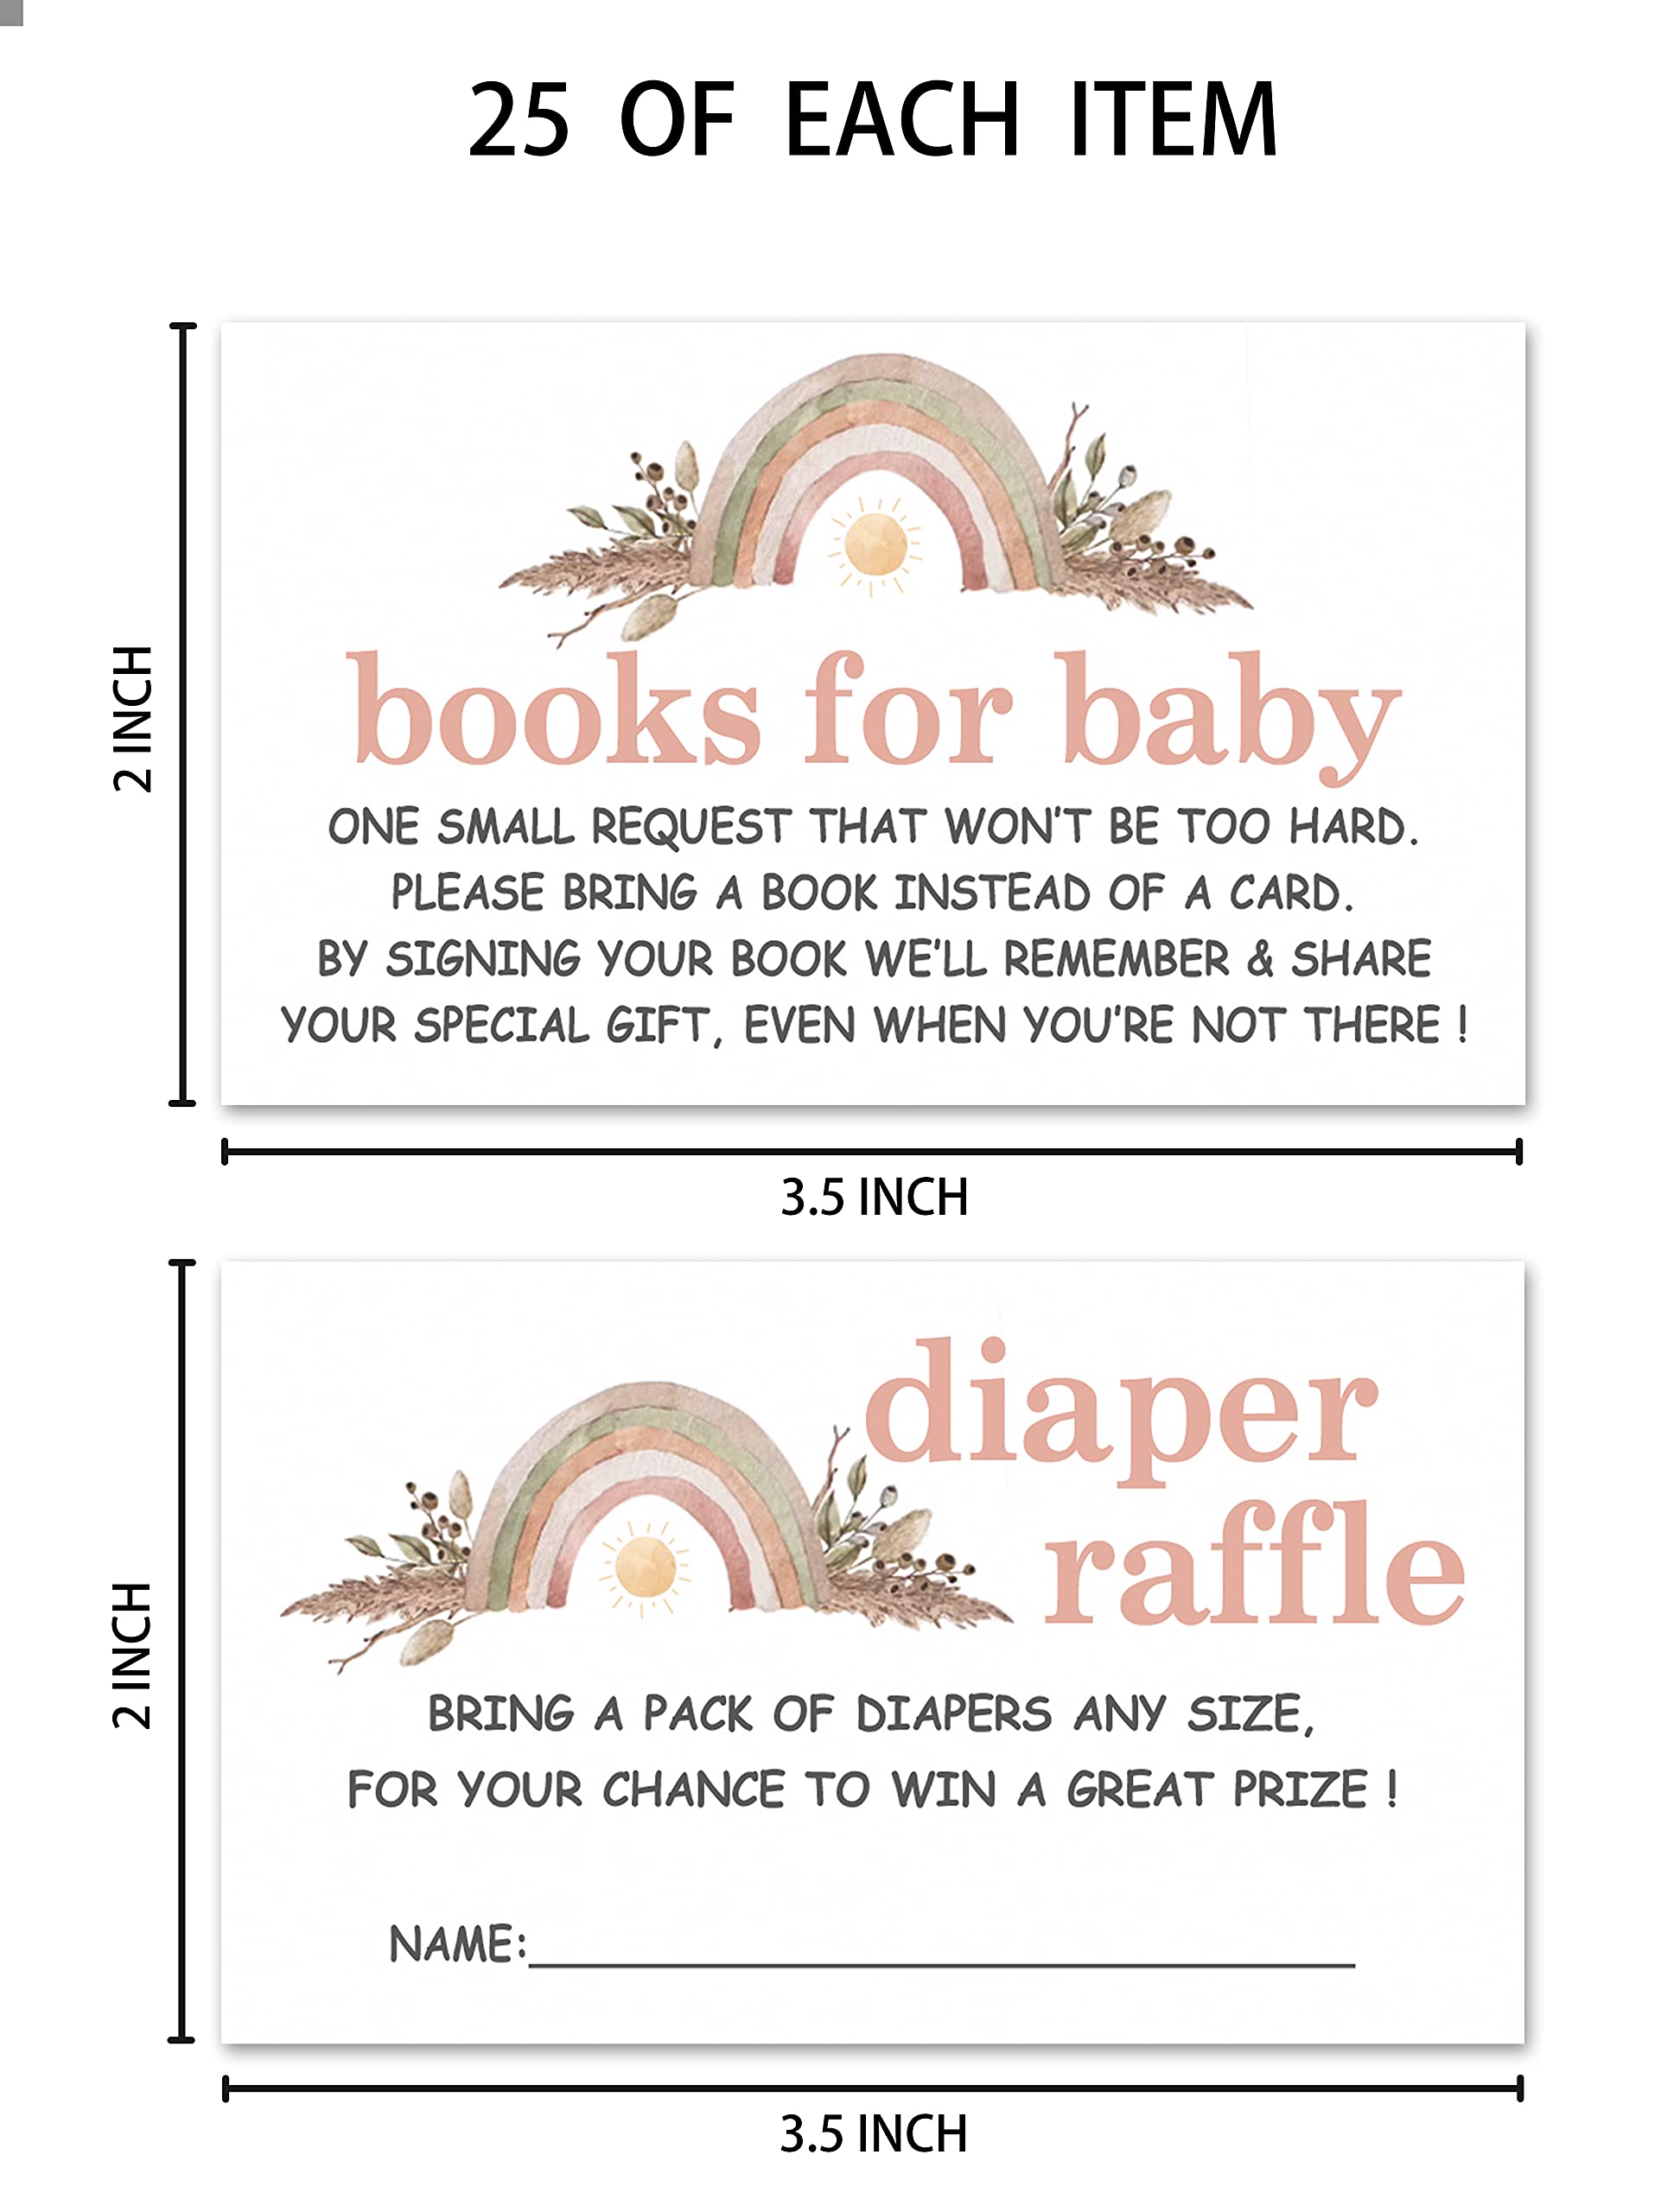 Rainbow Baby Shower Invitation Set, Books For Baby, Thank You, Diaper Raffle, Rainbow Fill In Invites Cards, Each Design 25 Cards & Envelopes (Total 100 Cards) – (bb001-taozhuang)